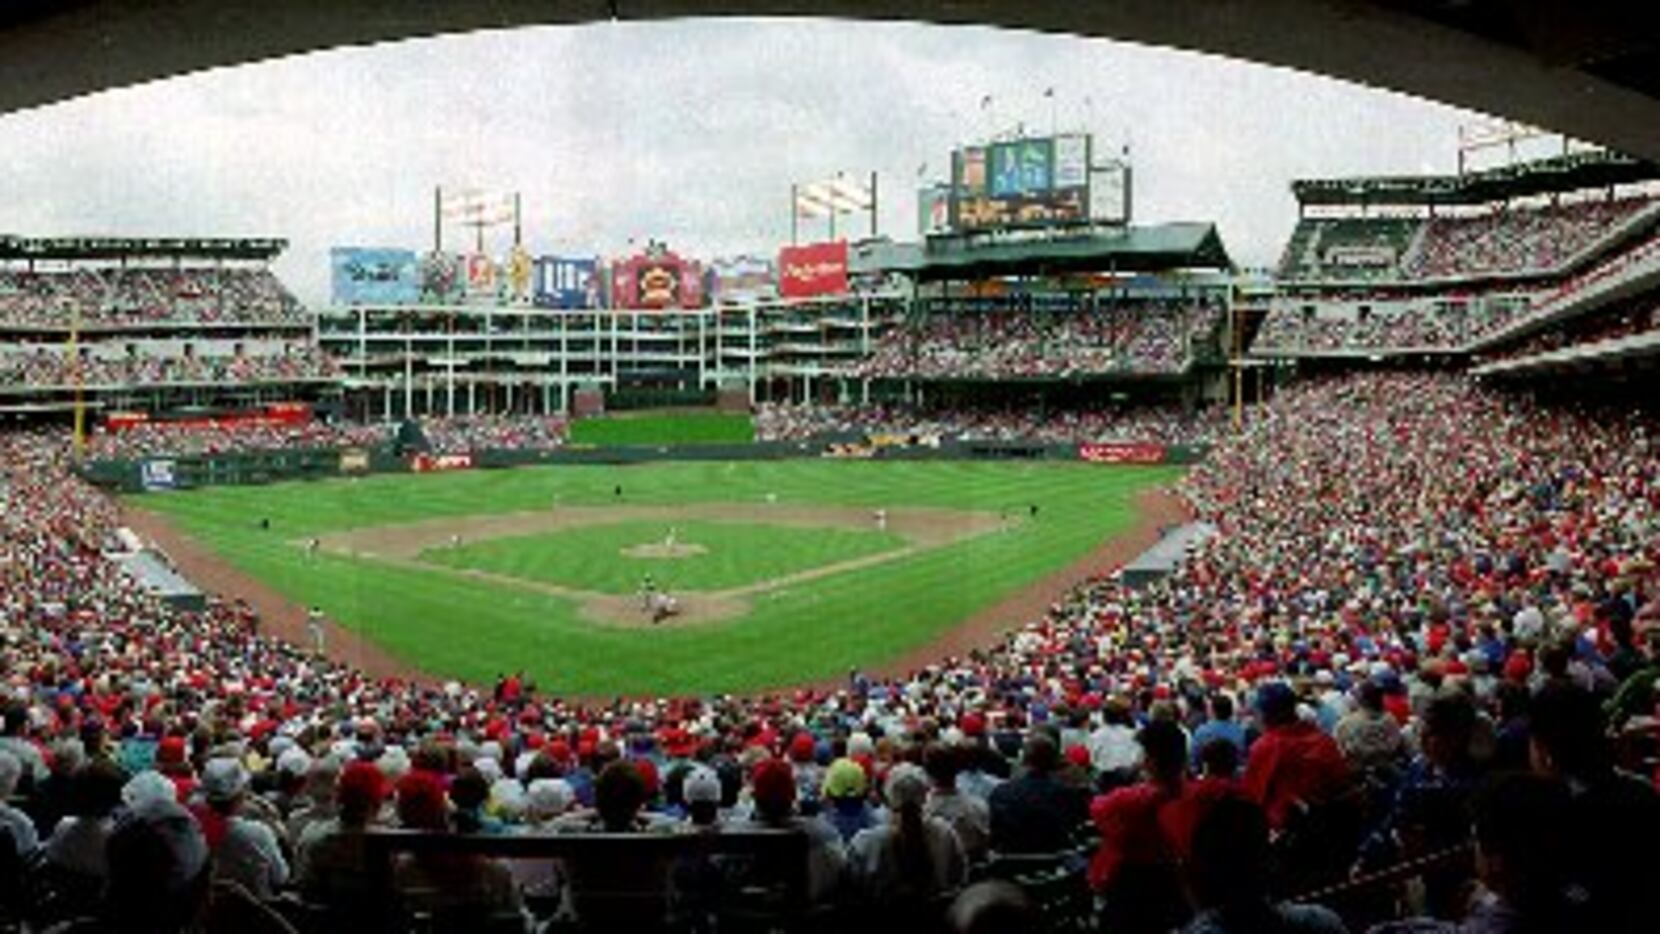 Top moments in Globe Life Park history, No. 9: Opening Day, 1994